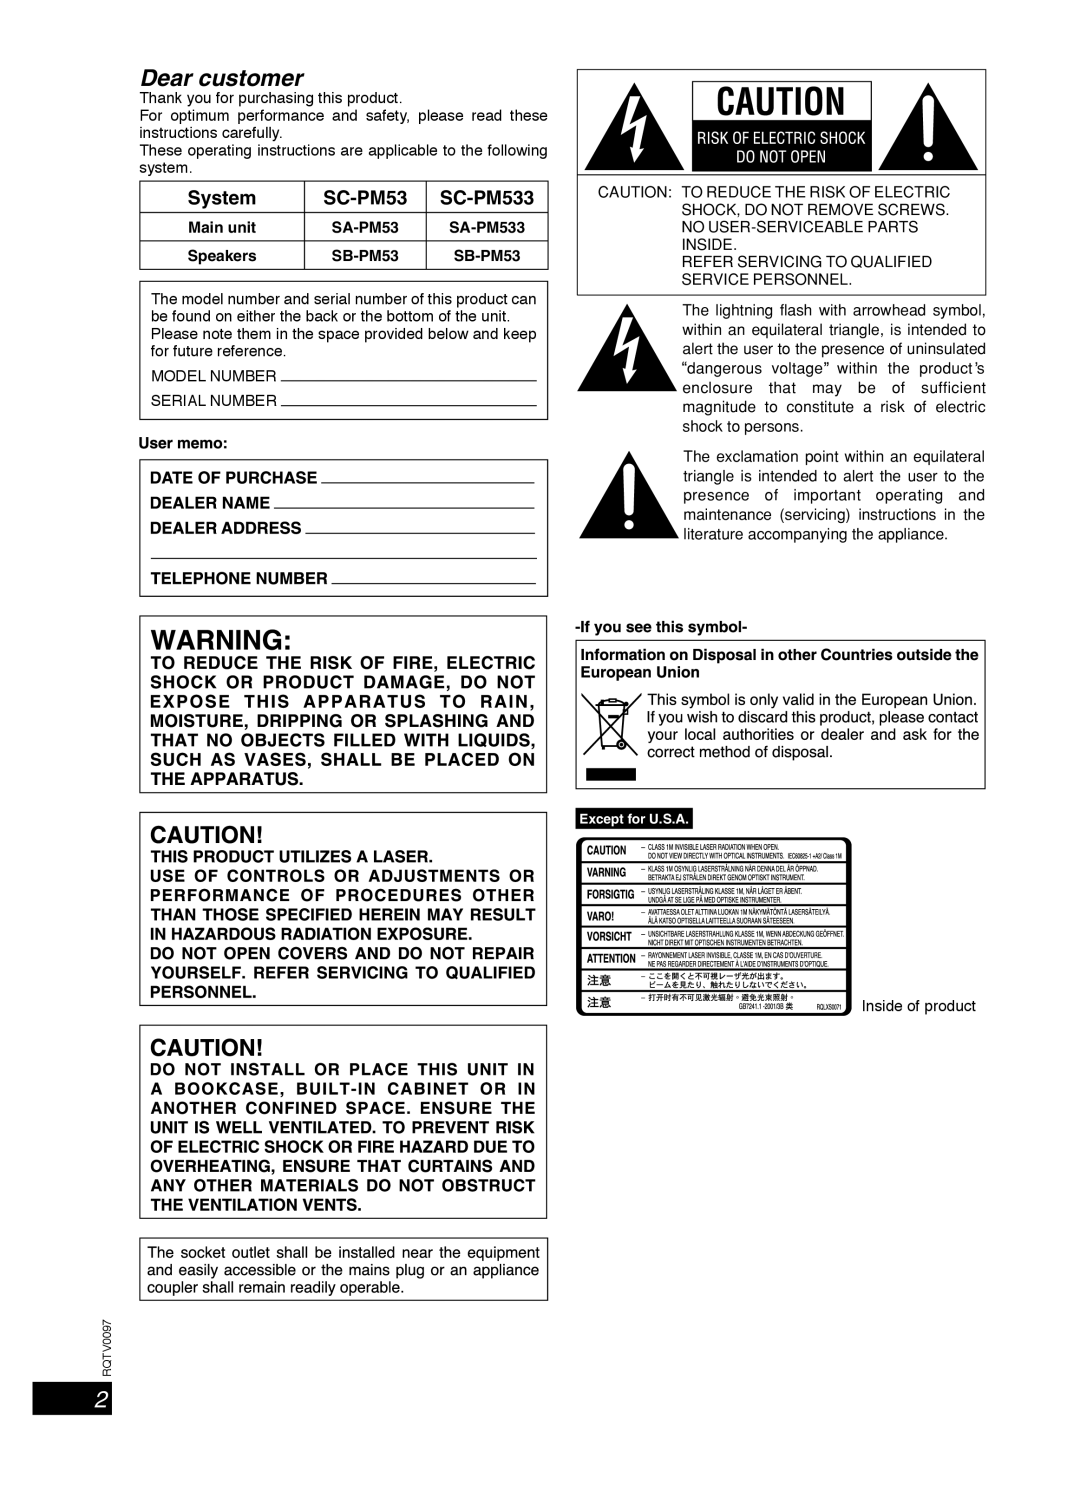 Panasonic RQTV0097-2P, SCPM533 important safety instructions System, SC-PM533 